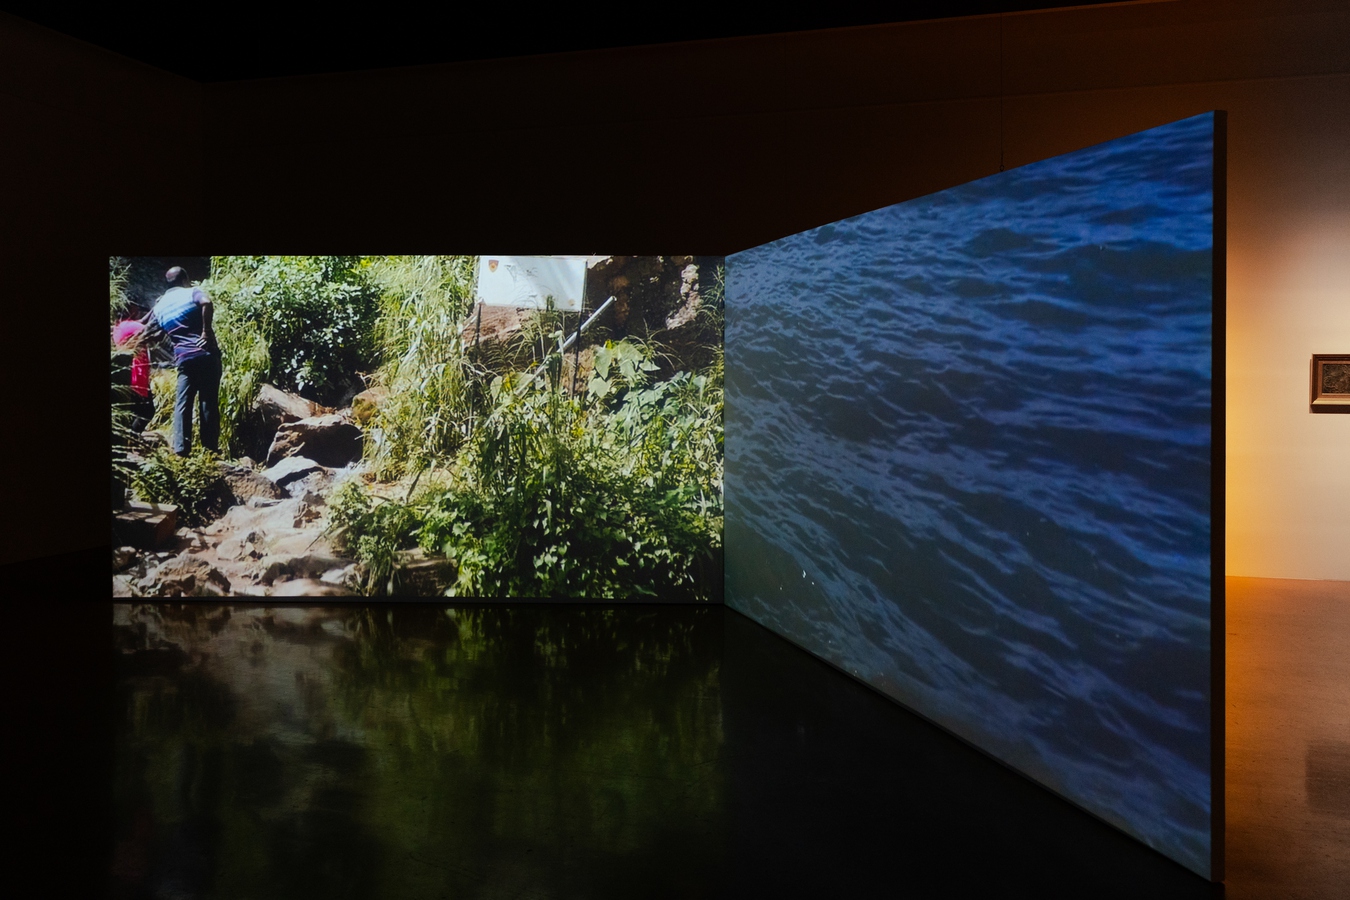 Image: Dilohana Lekamge, A Different Ocean (installation view), 2021. Two-channel video and sound. 5'01". Photo by Rosa Nevison.